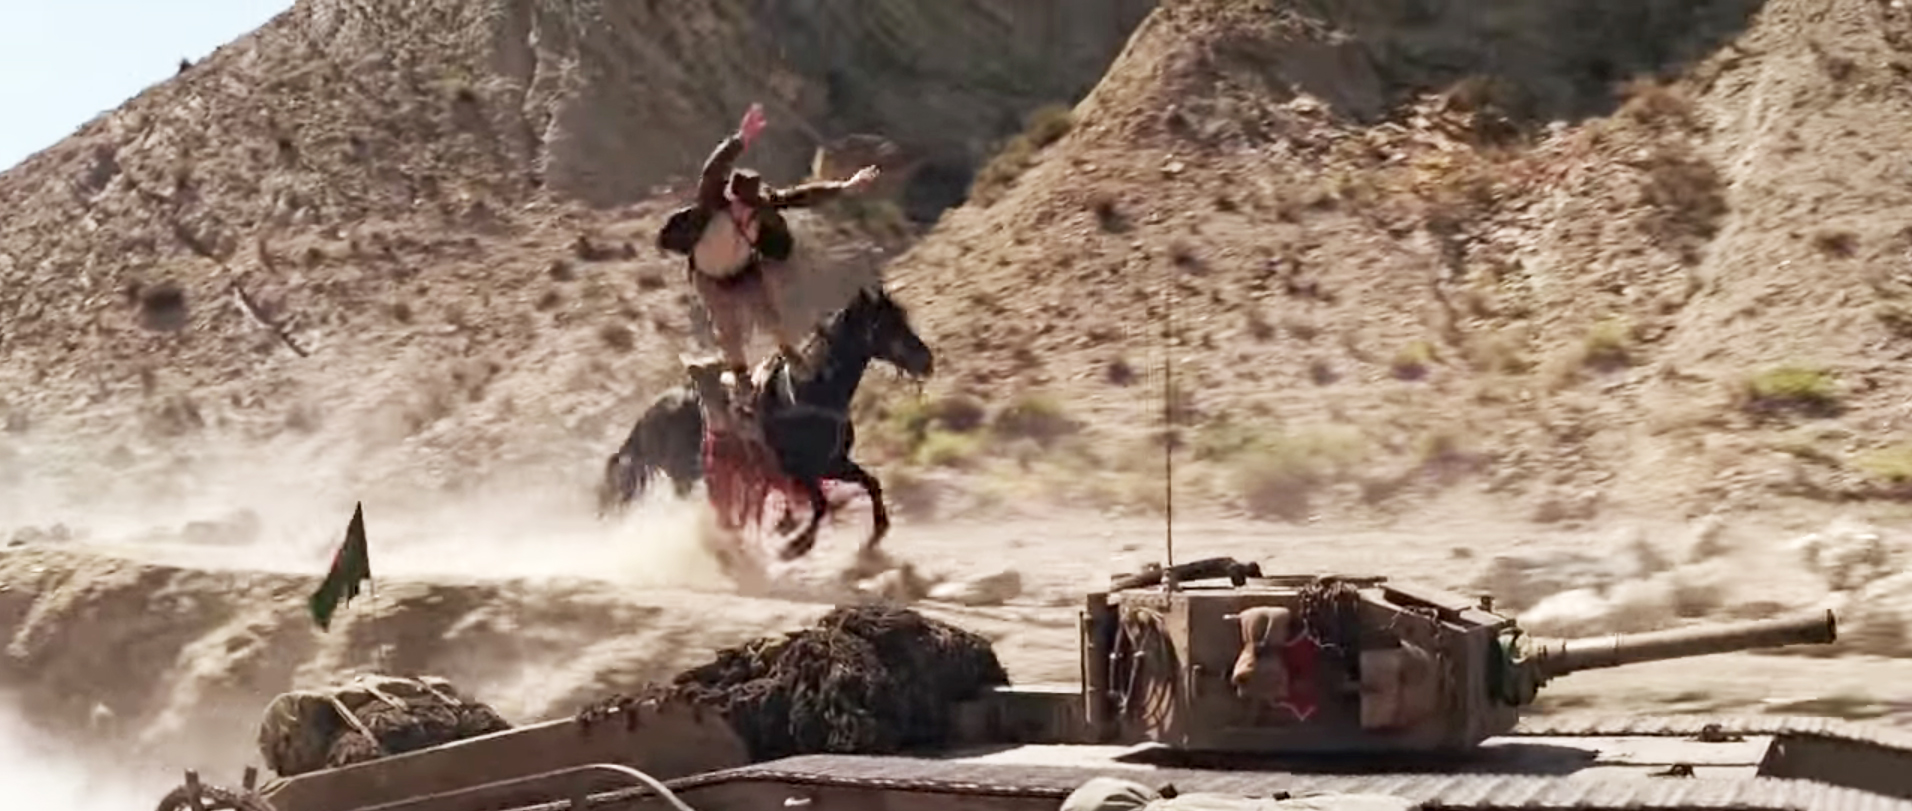 Vic Armstong jumps from a horse onto a tank in Indiana Jones and the Last Crusade